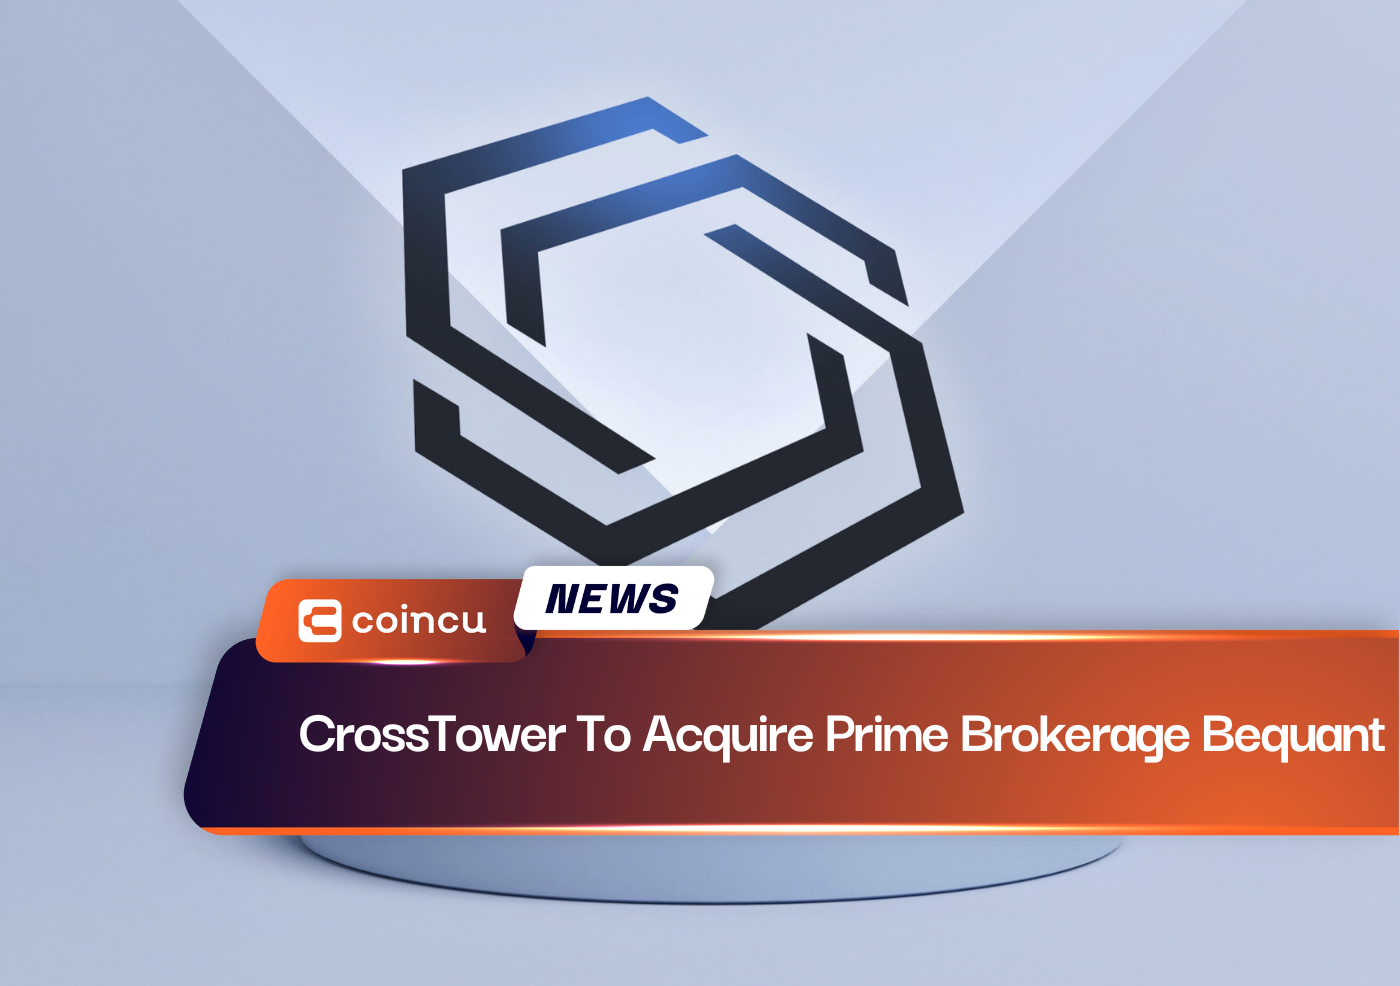 CrossTower To Acquire Prime Brokerage Bequant